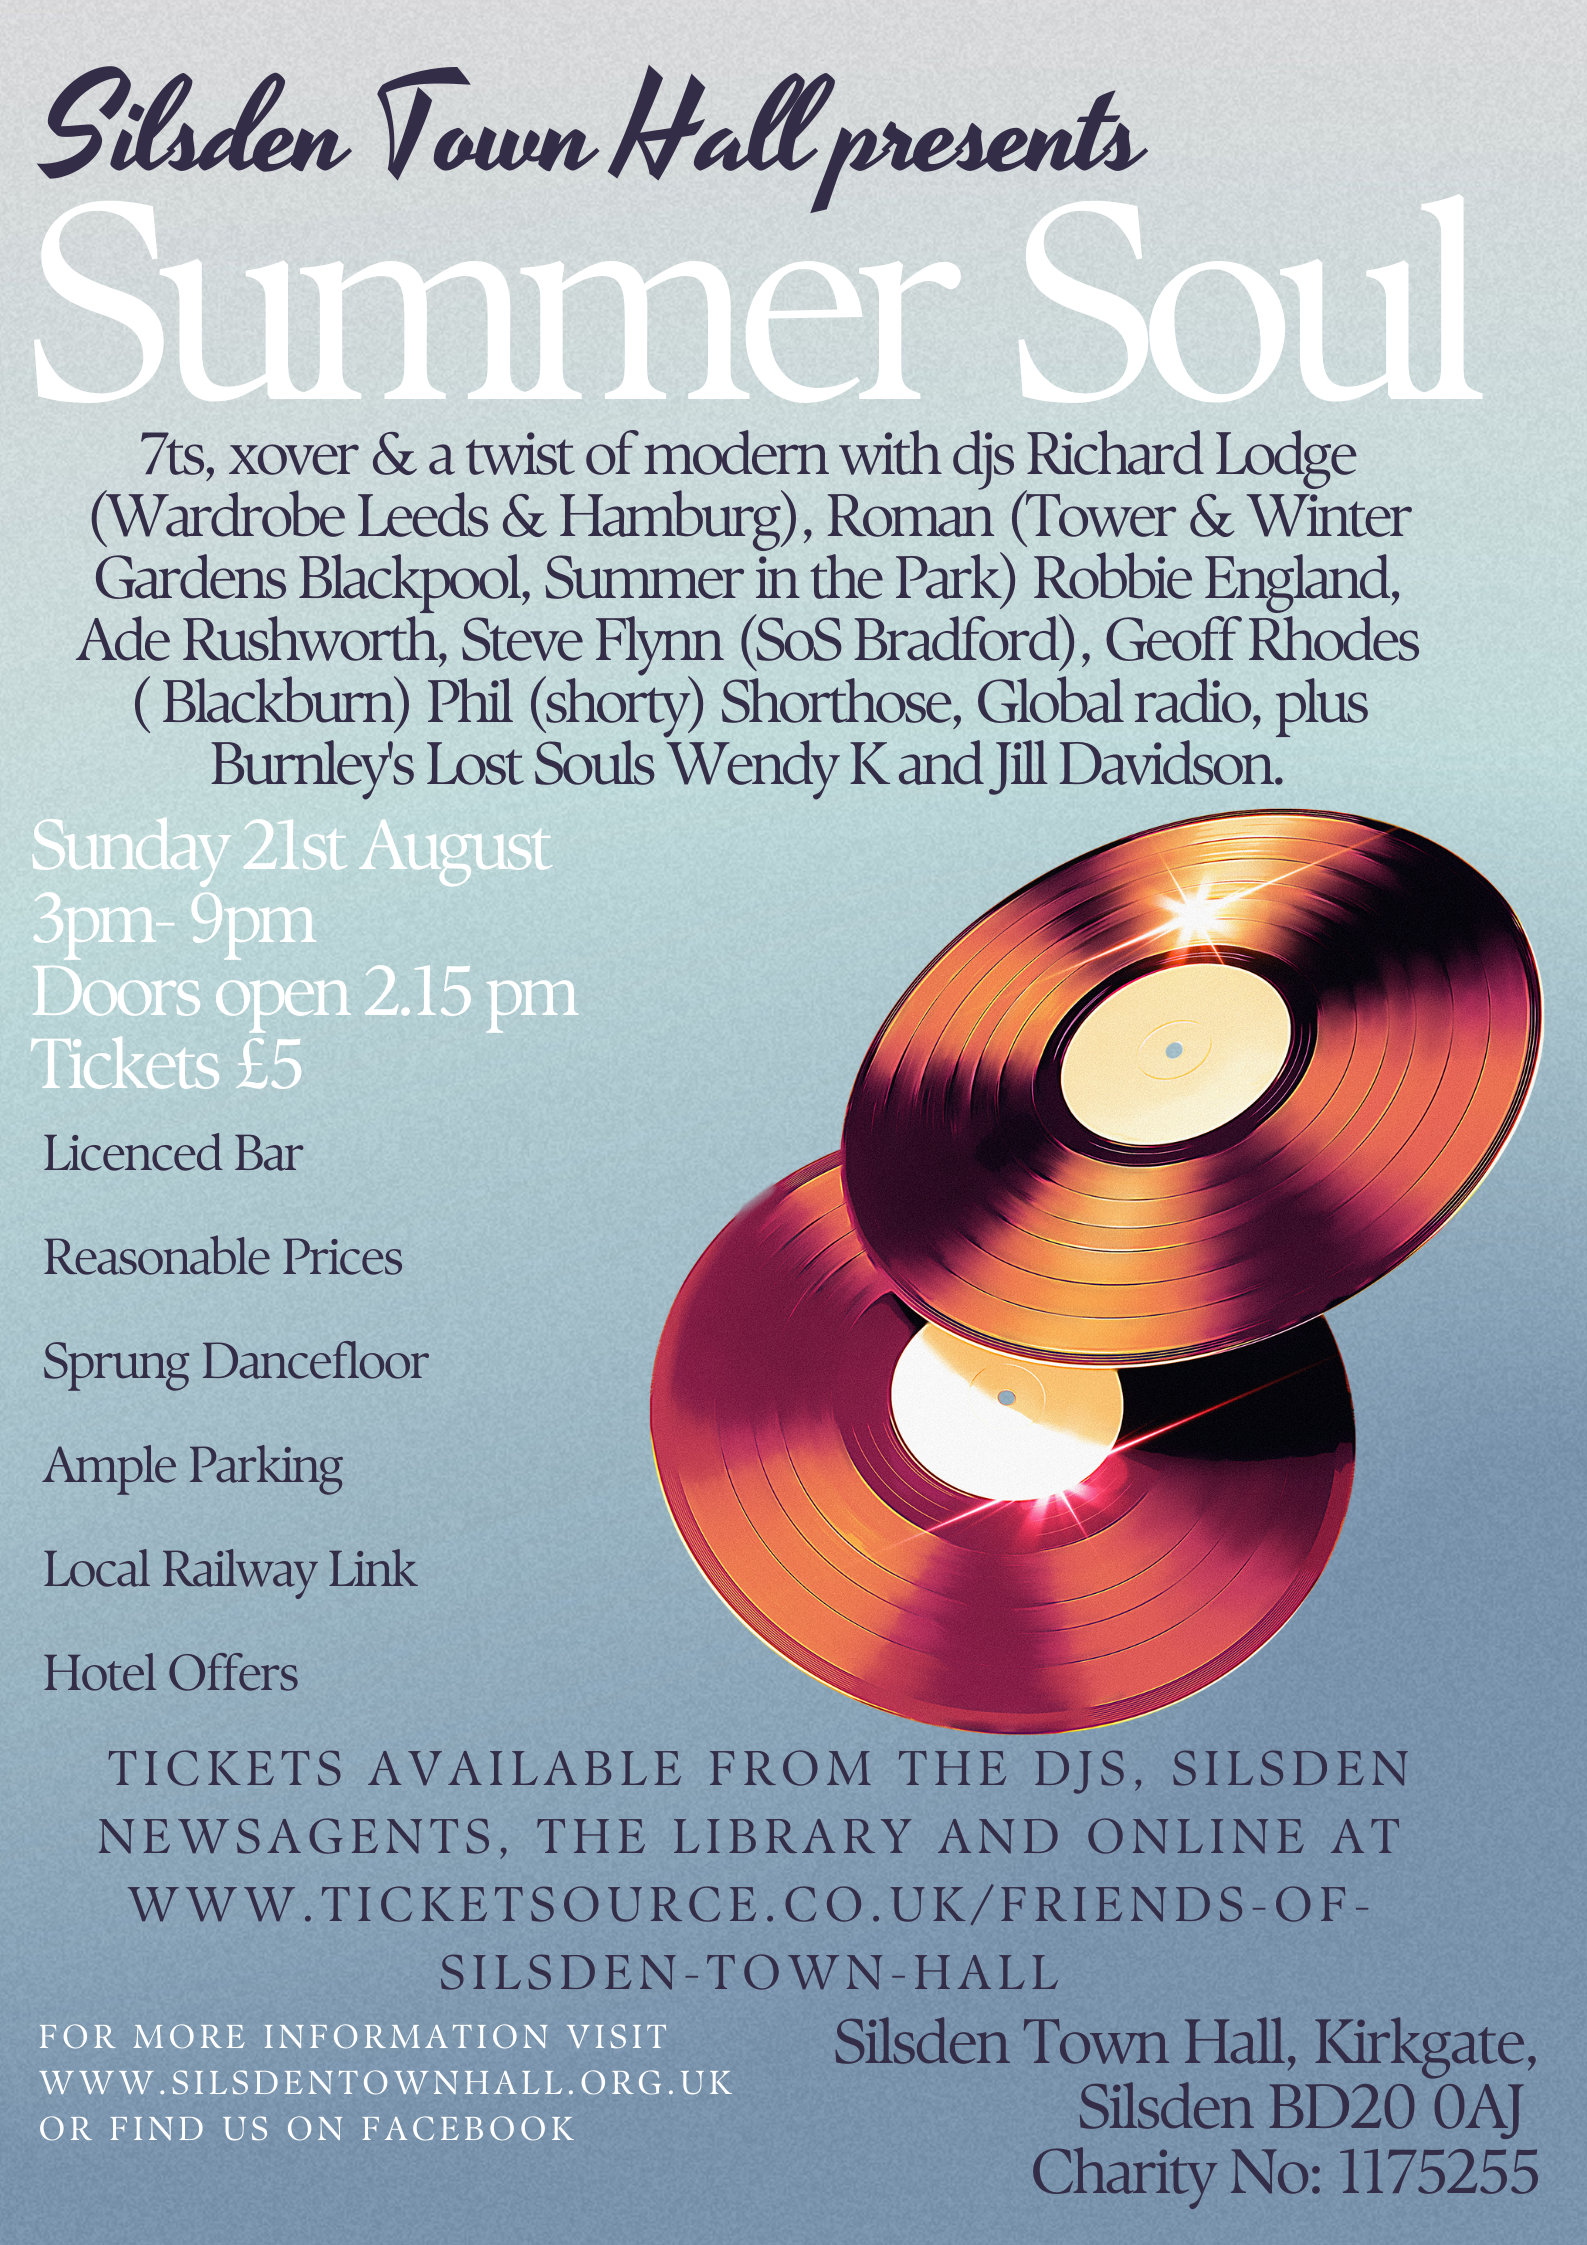 Northern Soul Dancing, Silsden Town Hall, Summer Should, Sunday 21st August 2022